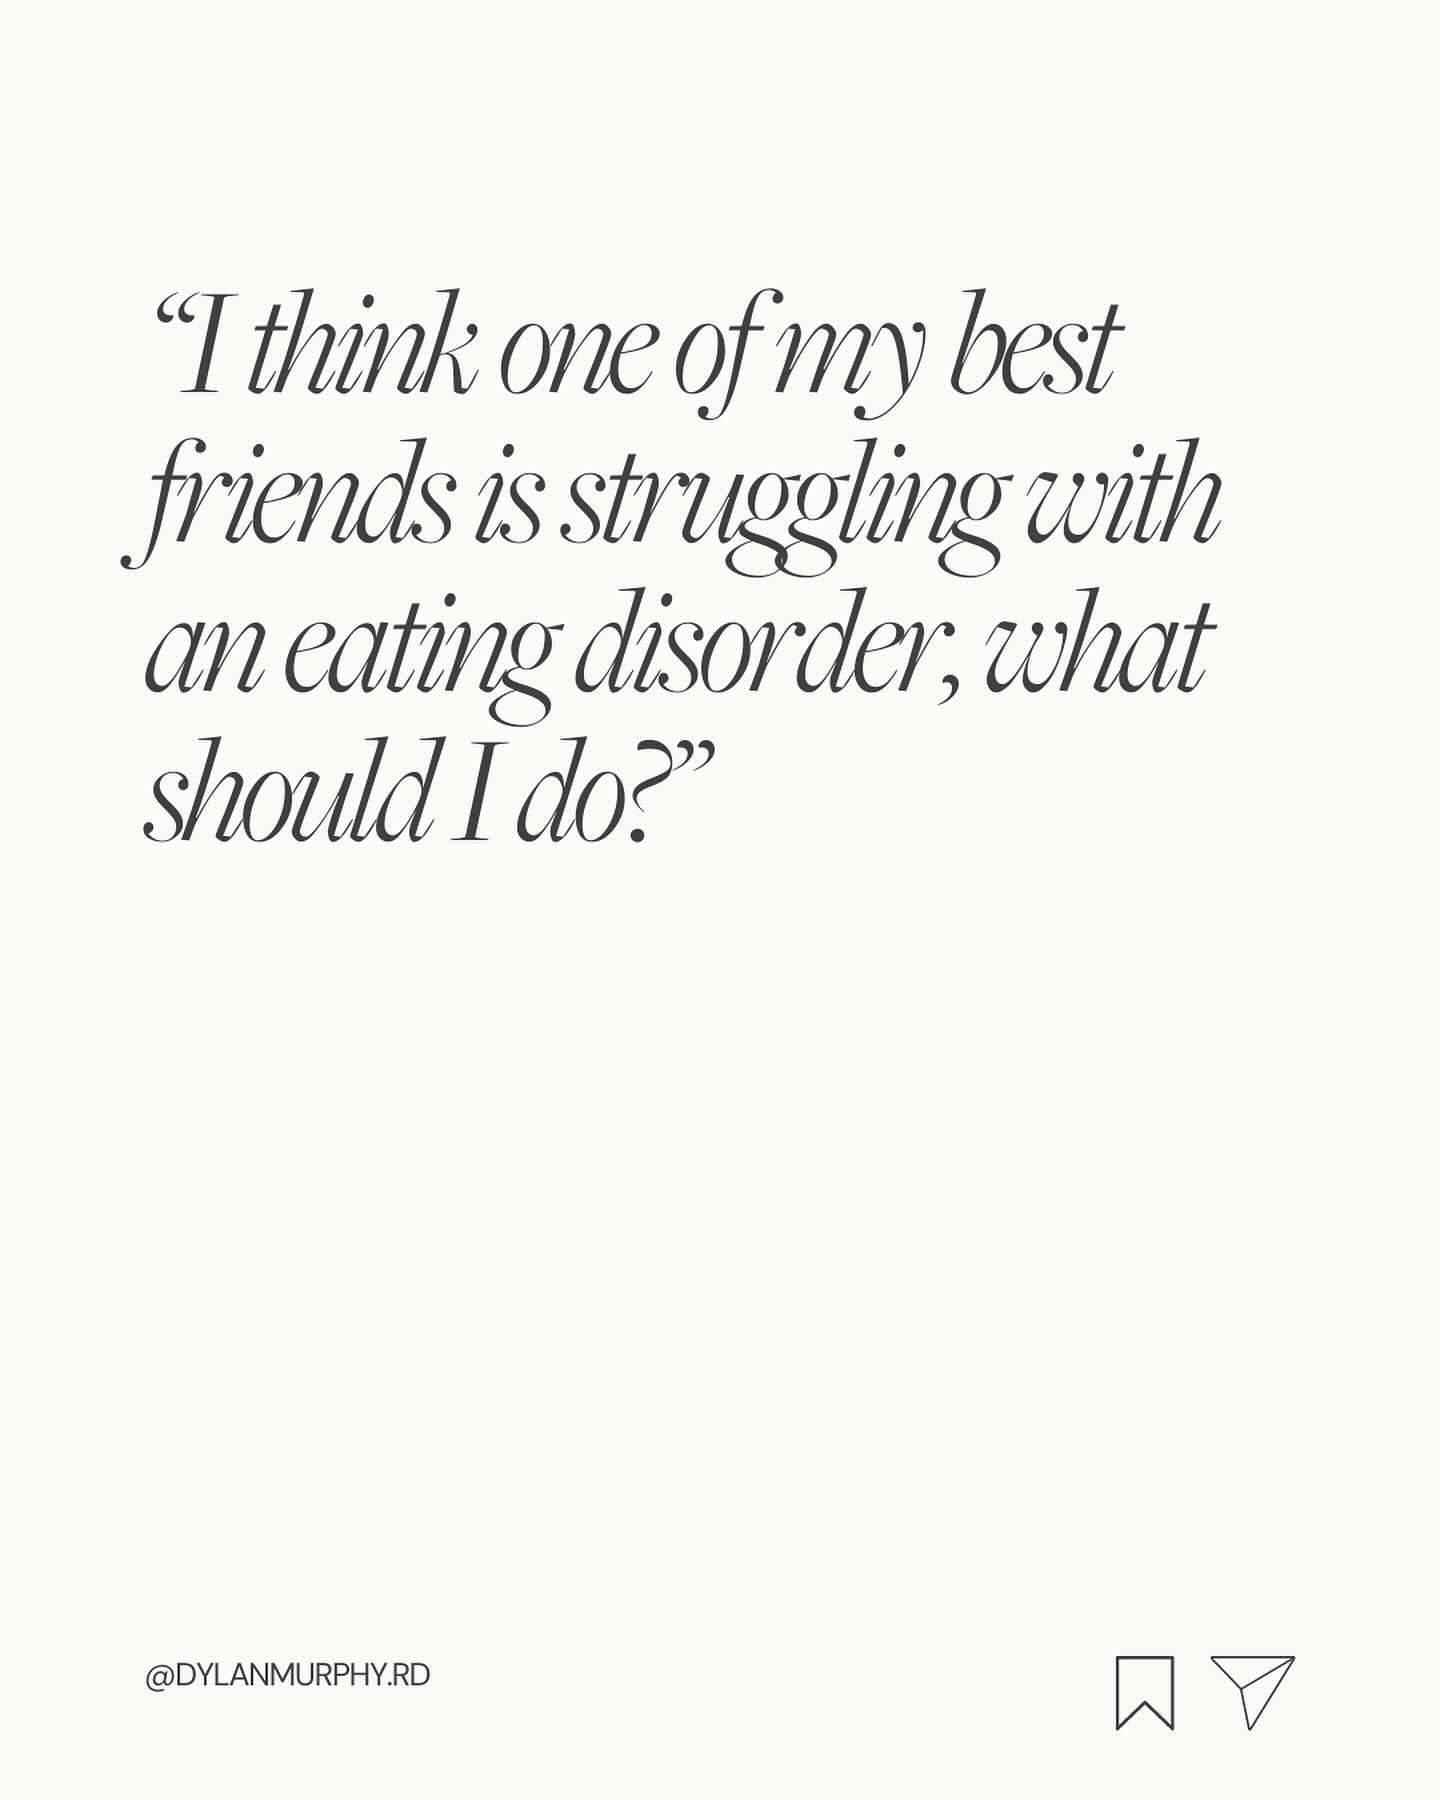 Save this post for tips on navigating talking to a friend who might be struggling with an eating disorder 🤍

#eatingdisorderawareness #recoveryjourney | disordered eating support, intuitive eating tips, dietitians of instagram